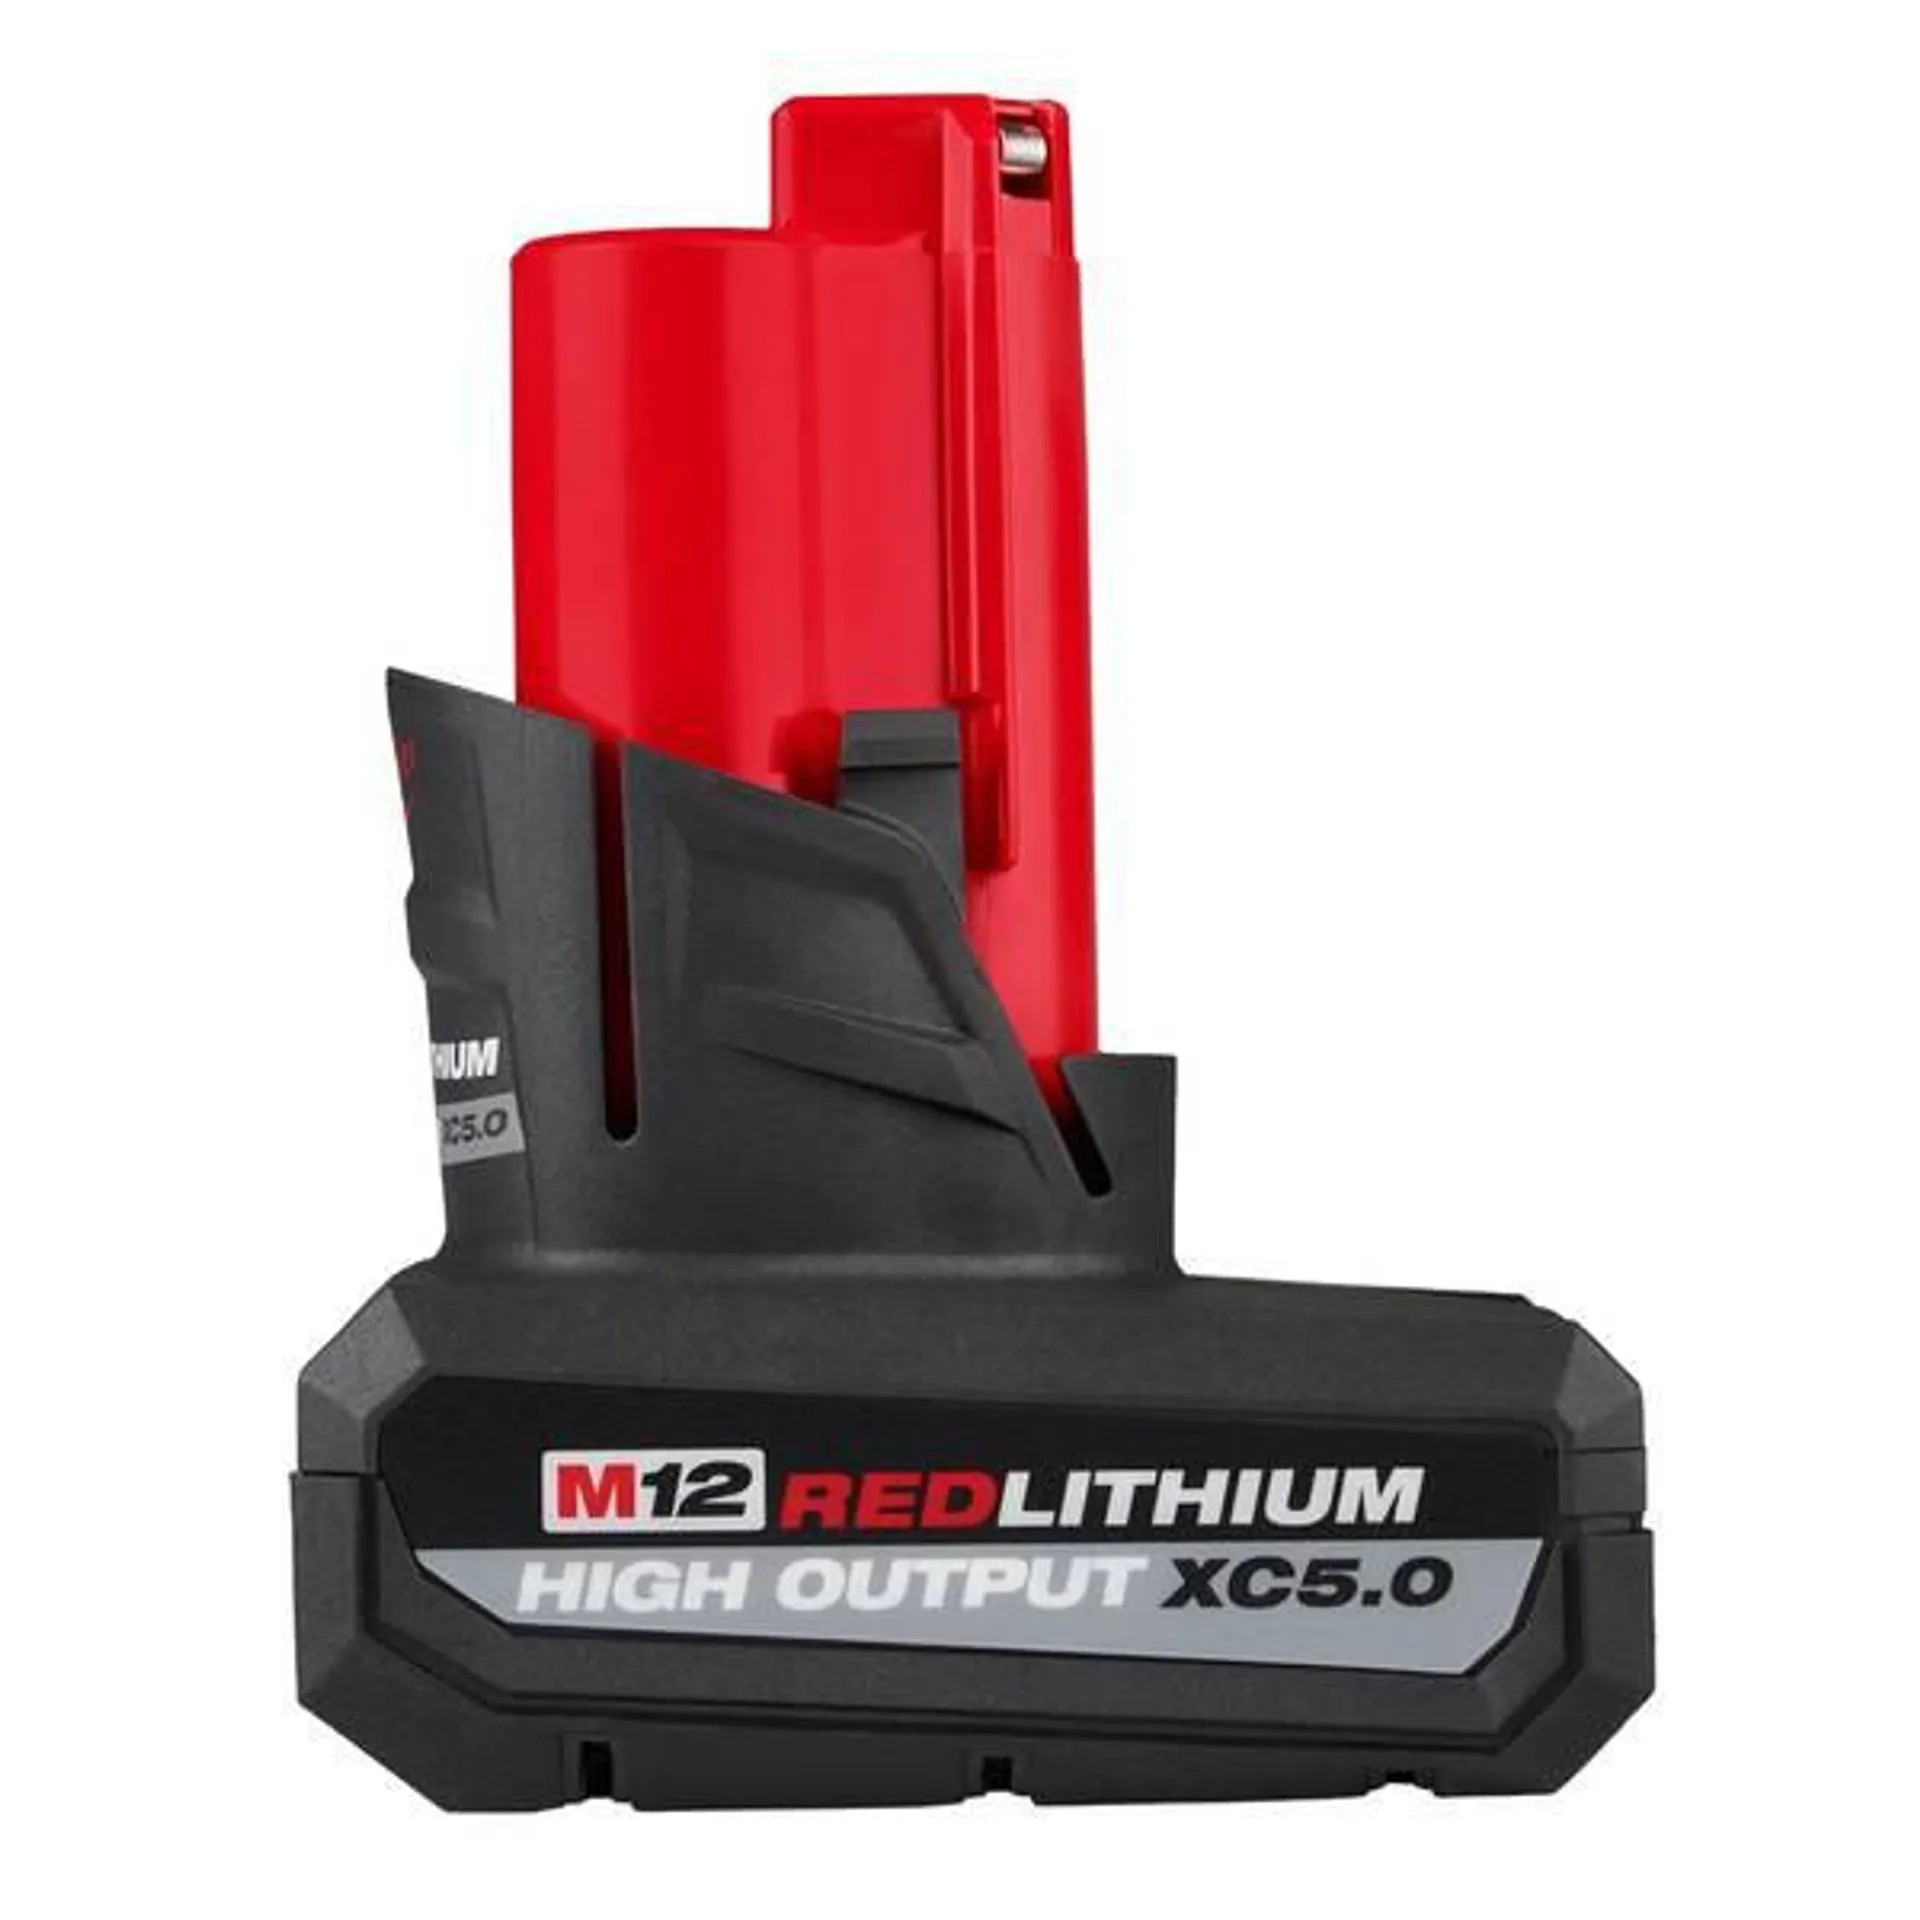 M12 REDLITHIUM HIGH OUTPUT XC5.0 Battery Pack